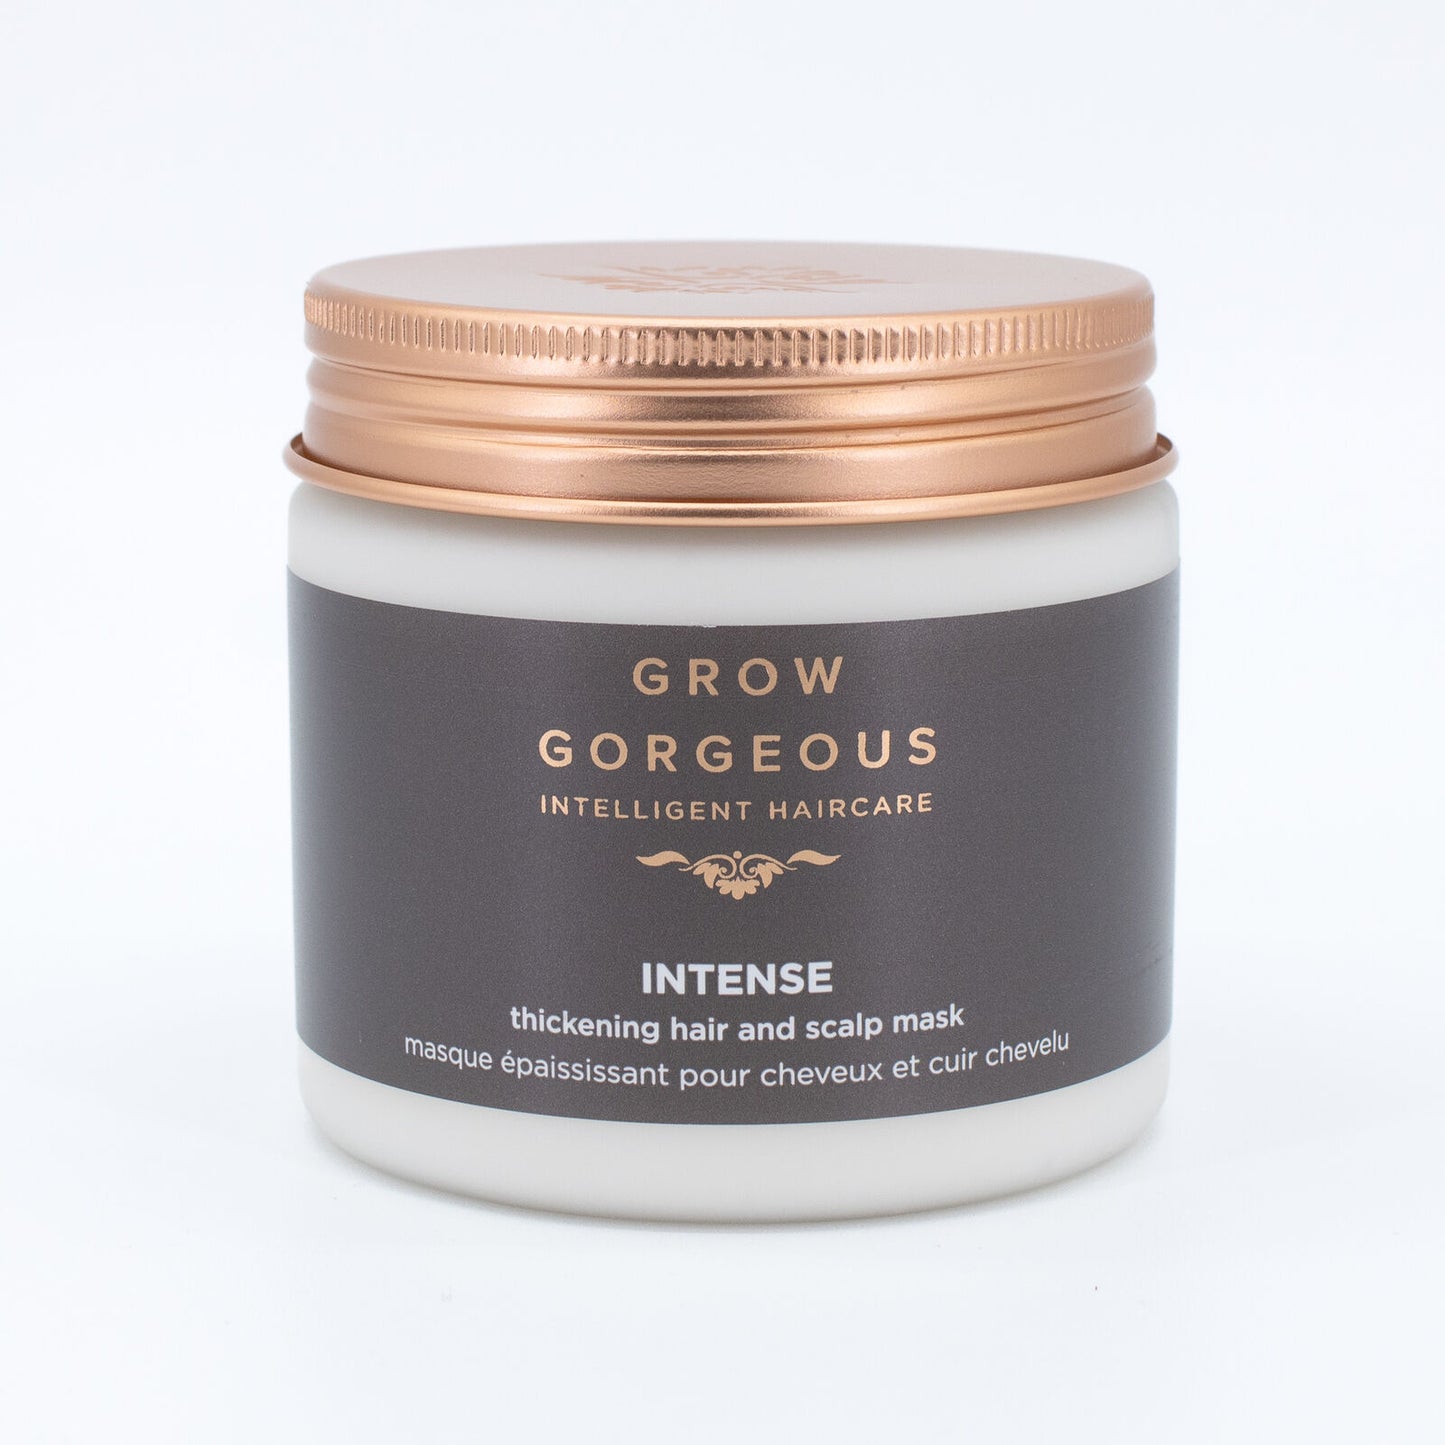 Grow Gorgeous Intense Thickening Hair and Scalp Mask 6.7oz - New